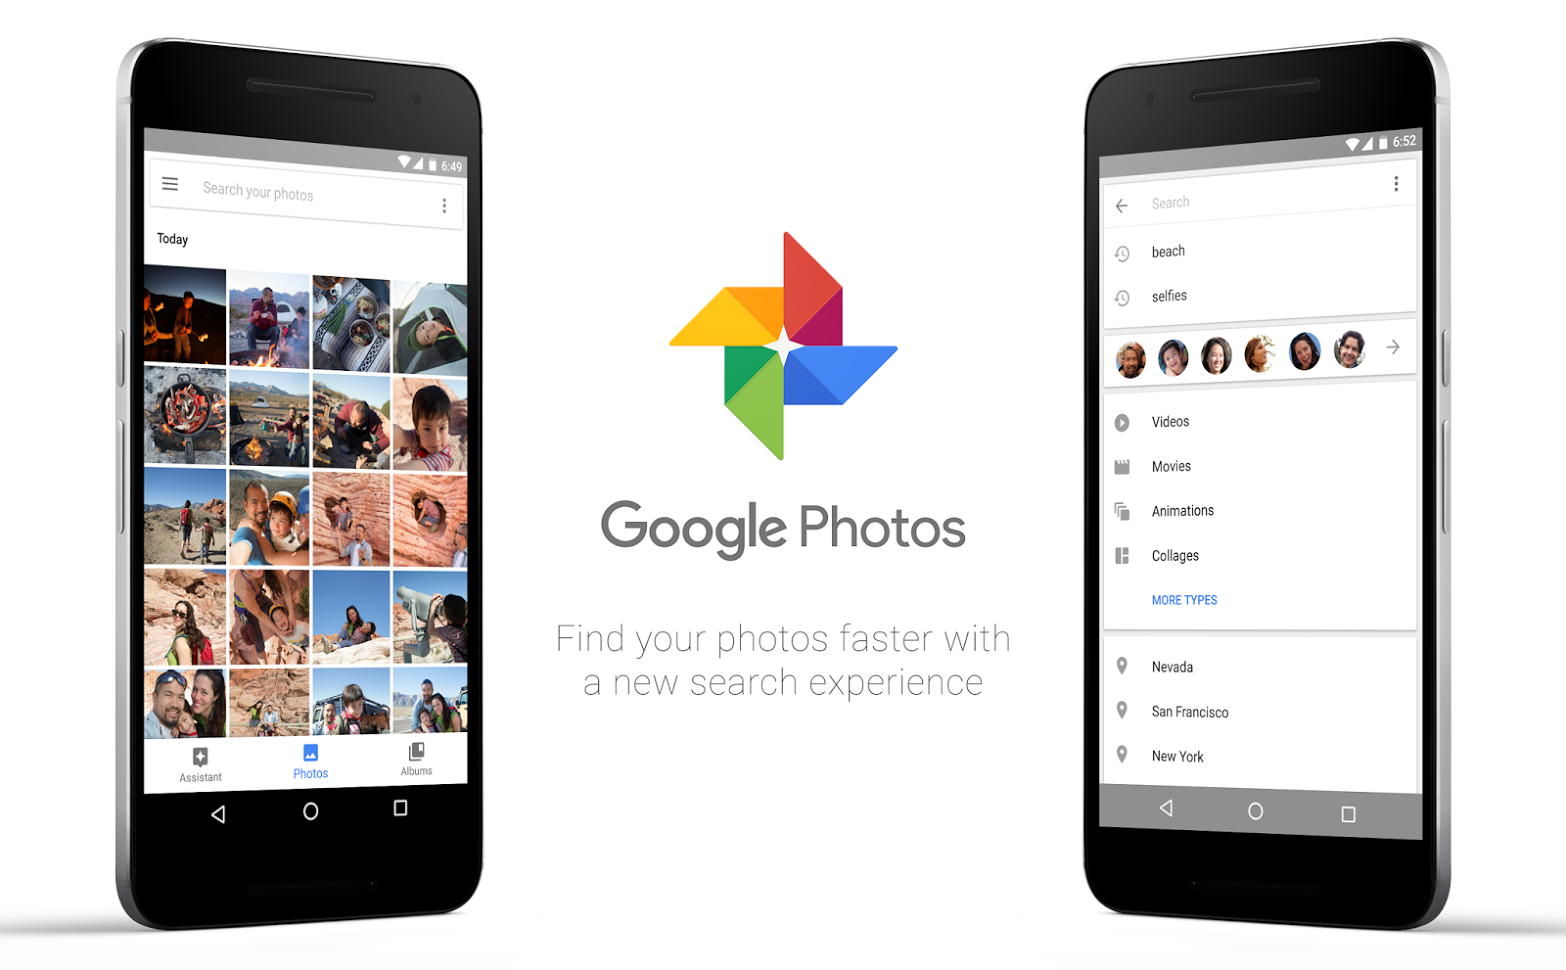 google-photos-update-brings-better-search-customizable-movies-image-cultofandroidcomwp-contentuploads201604n6p_photos_update-search-png